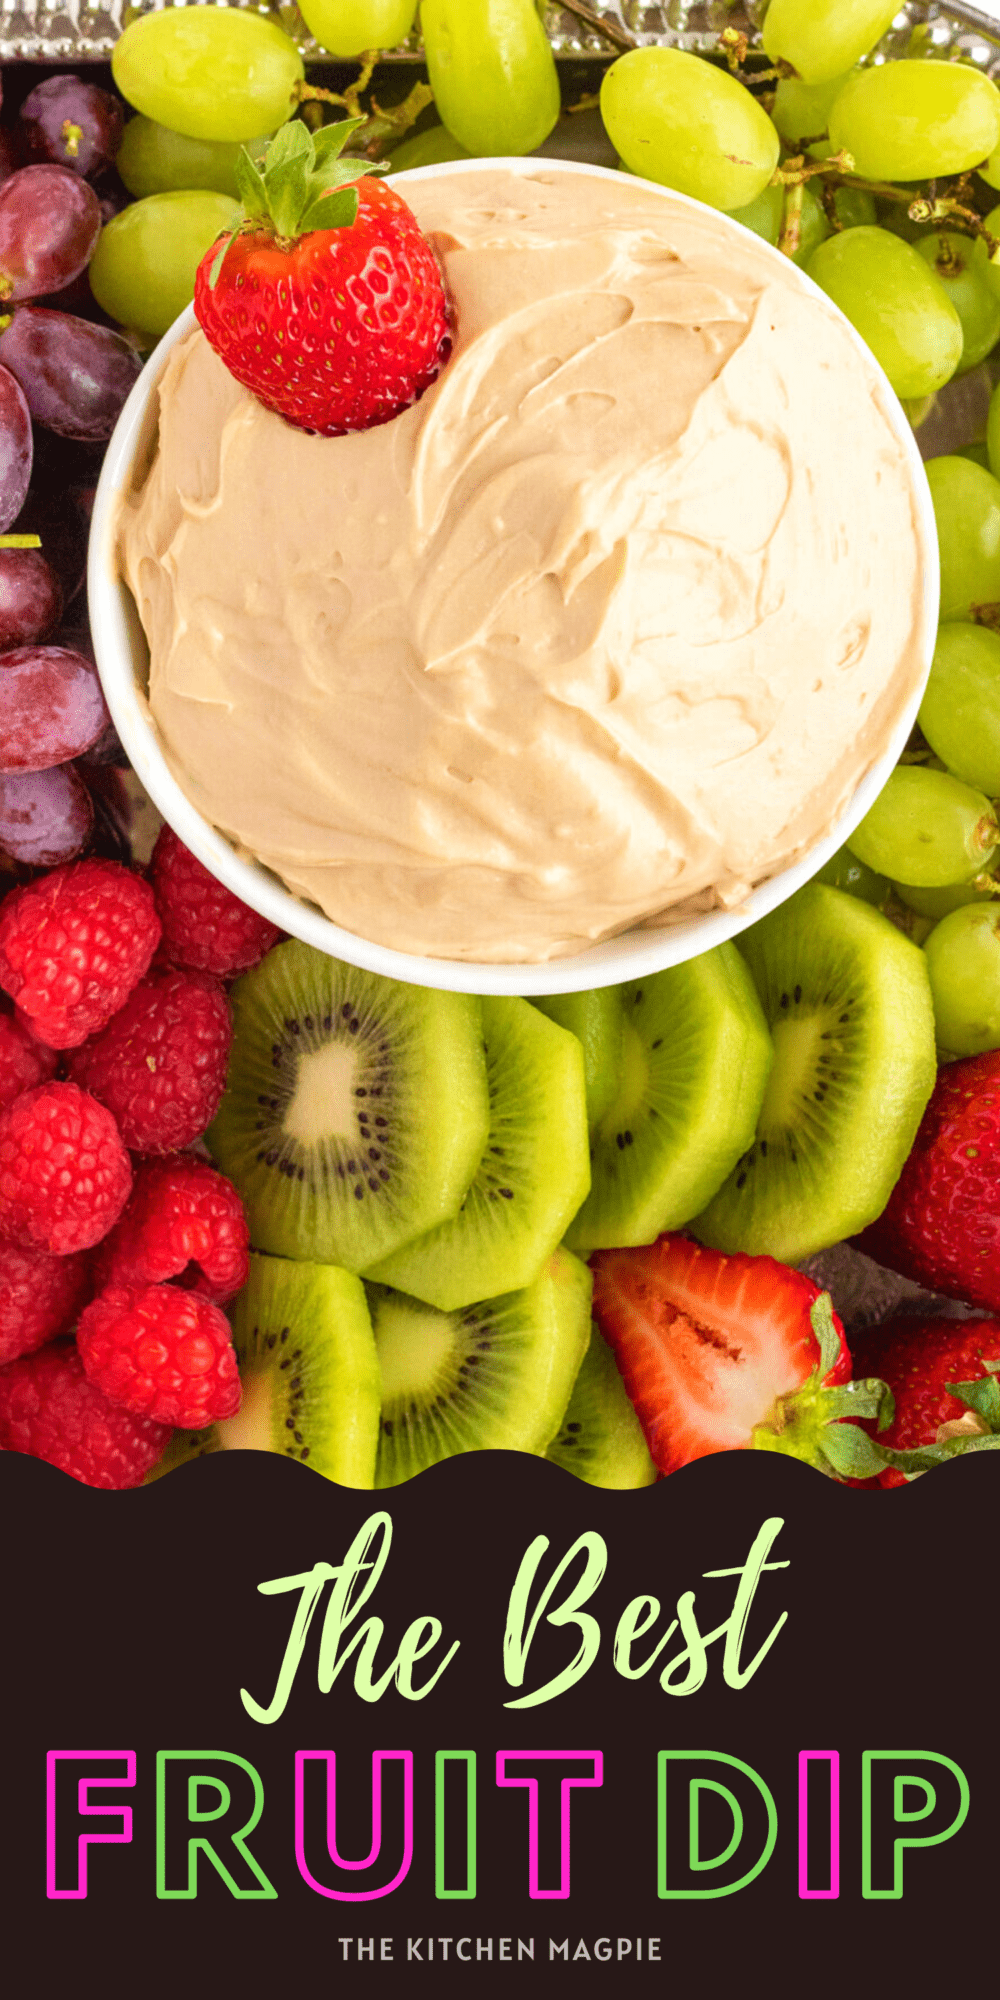 This delicious and easy classic fruit dip is brown sugar and cream cheese based, and is perfect served with a fruit tray or just as a side for fruit snacking!